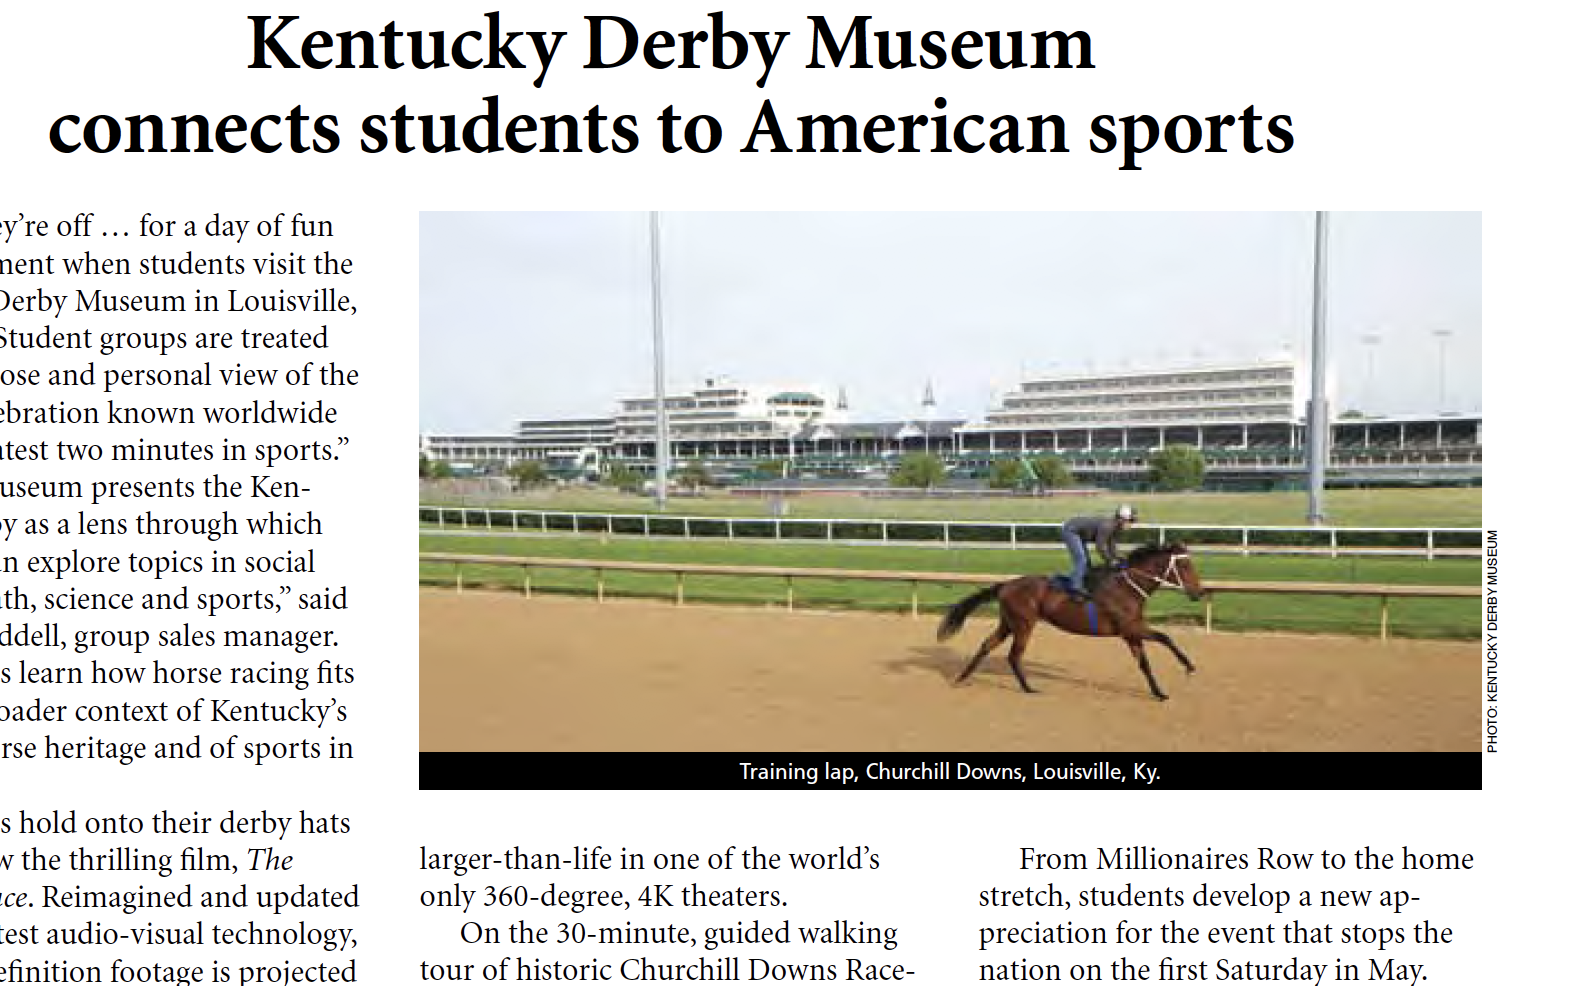 Kentucky Derby Museum connects students to American sports